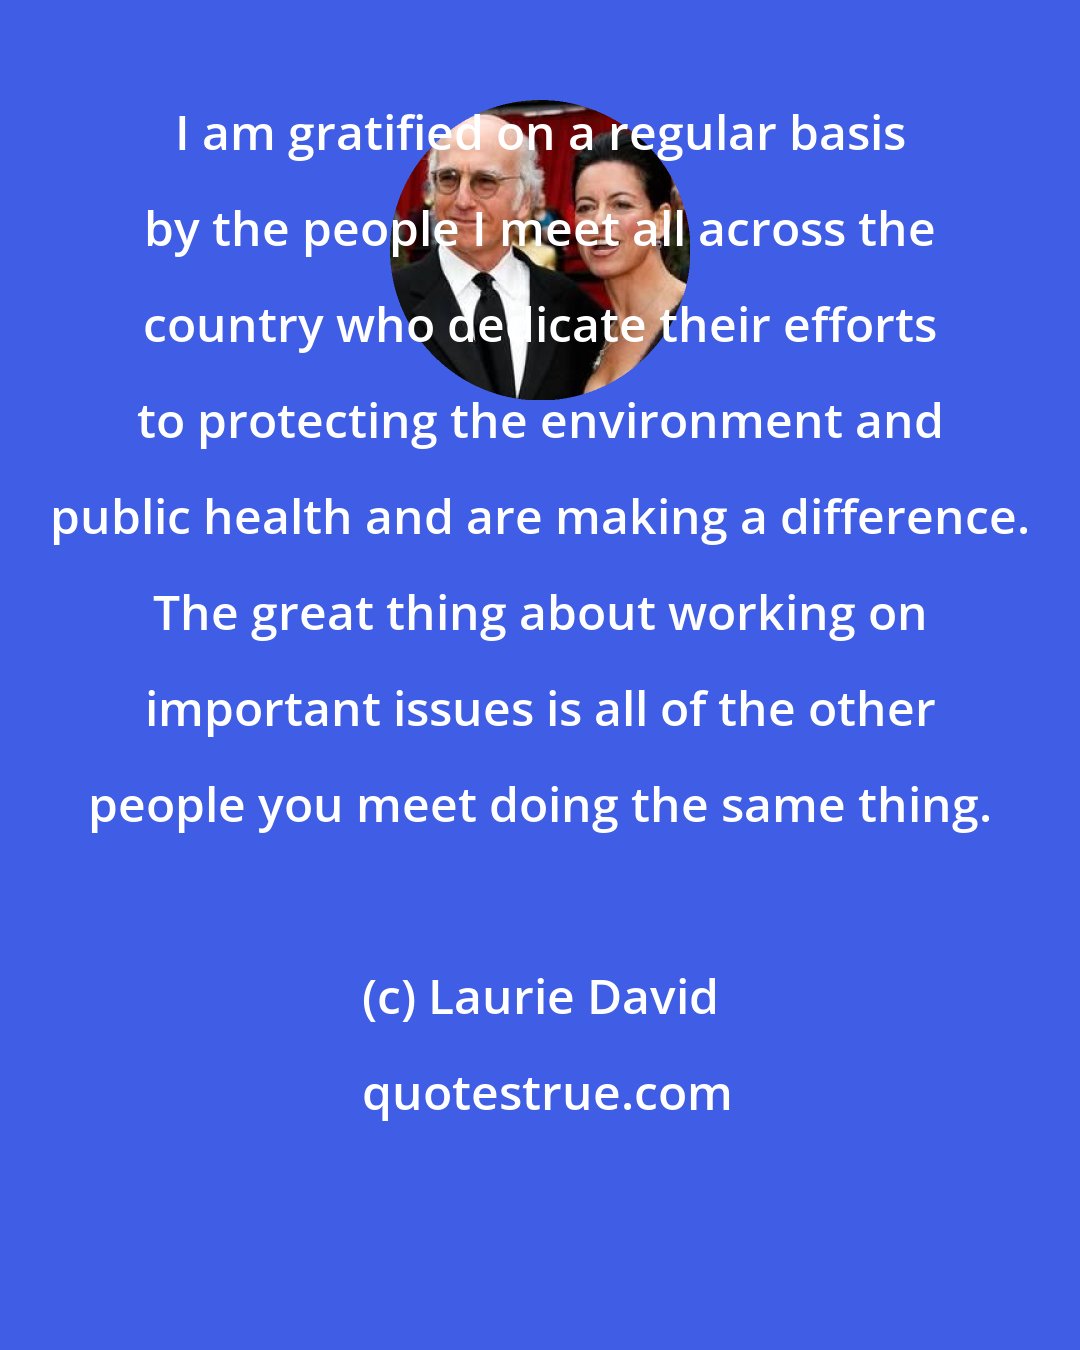 Laurie David: I am gratified on a regular basis by the people I meet all across the country who dedicate their efforts to protecting the environment and public health and are making a difference. The great thing about working on important issues is all of the other people you meet doing the same thing.